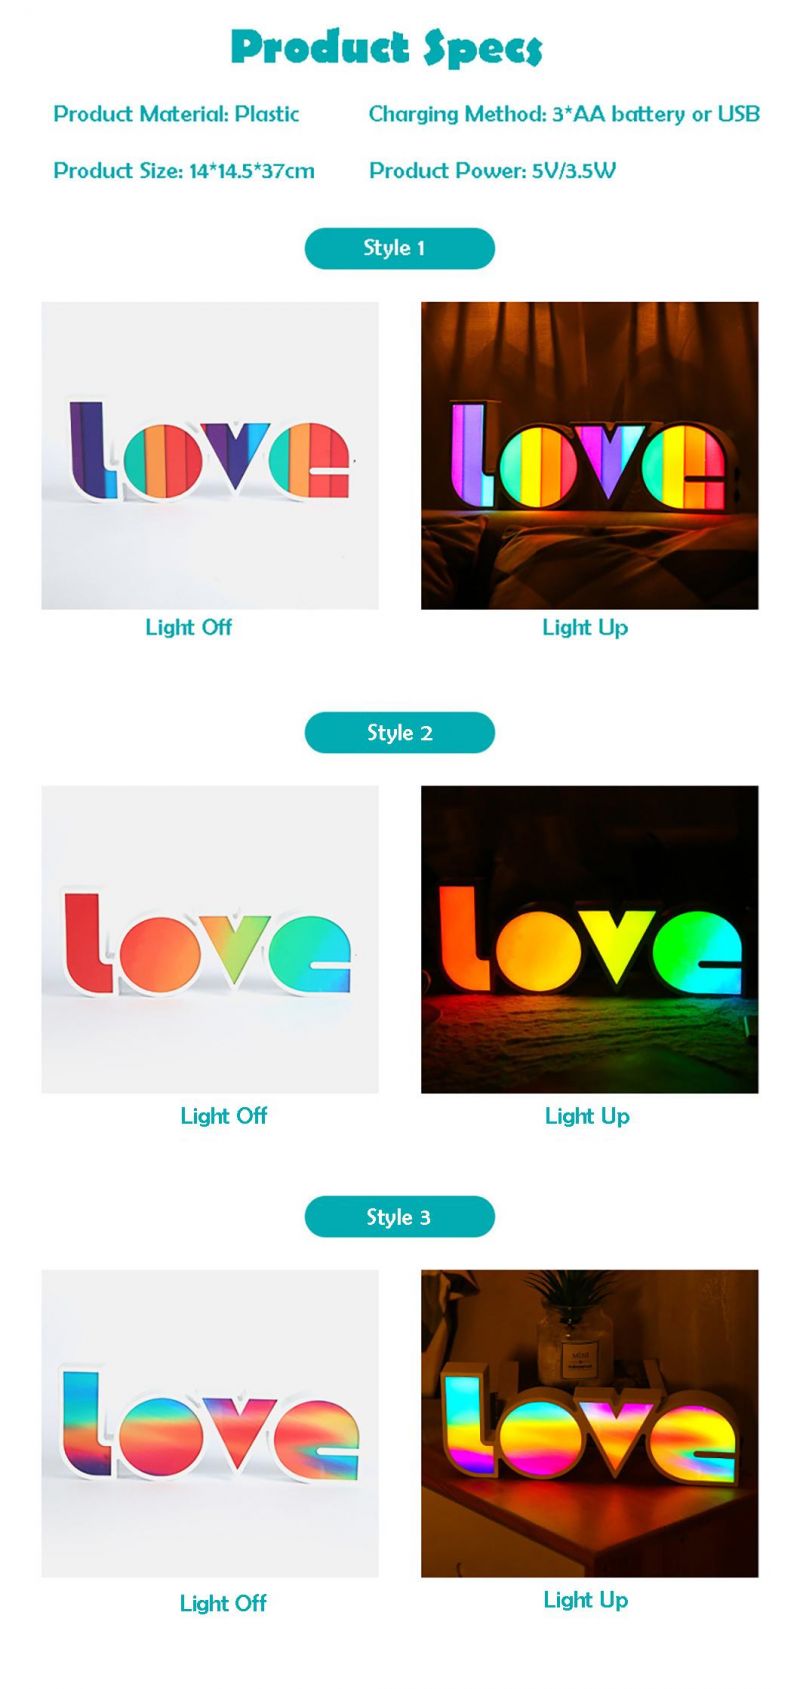 Love Sign LED Table Night Light for Bedroom Party Wedding Decor